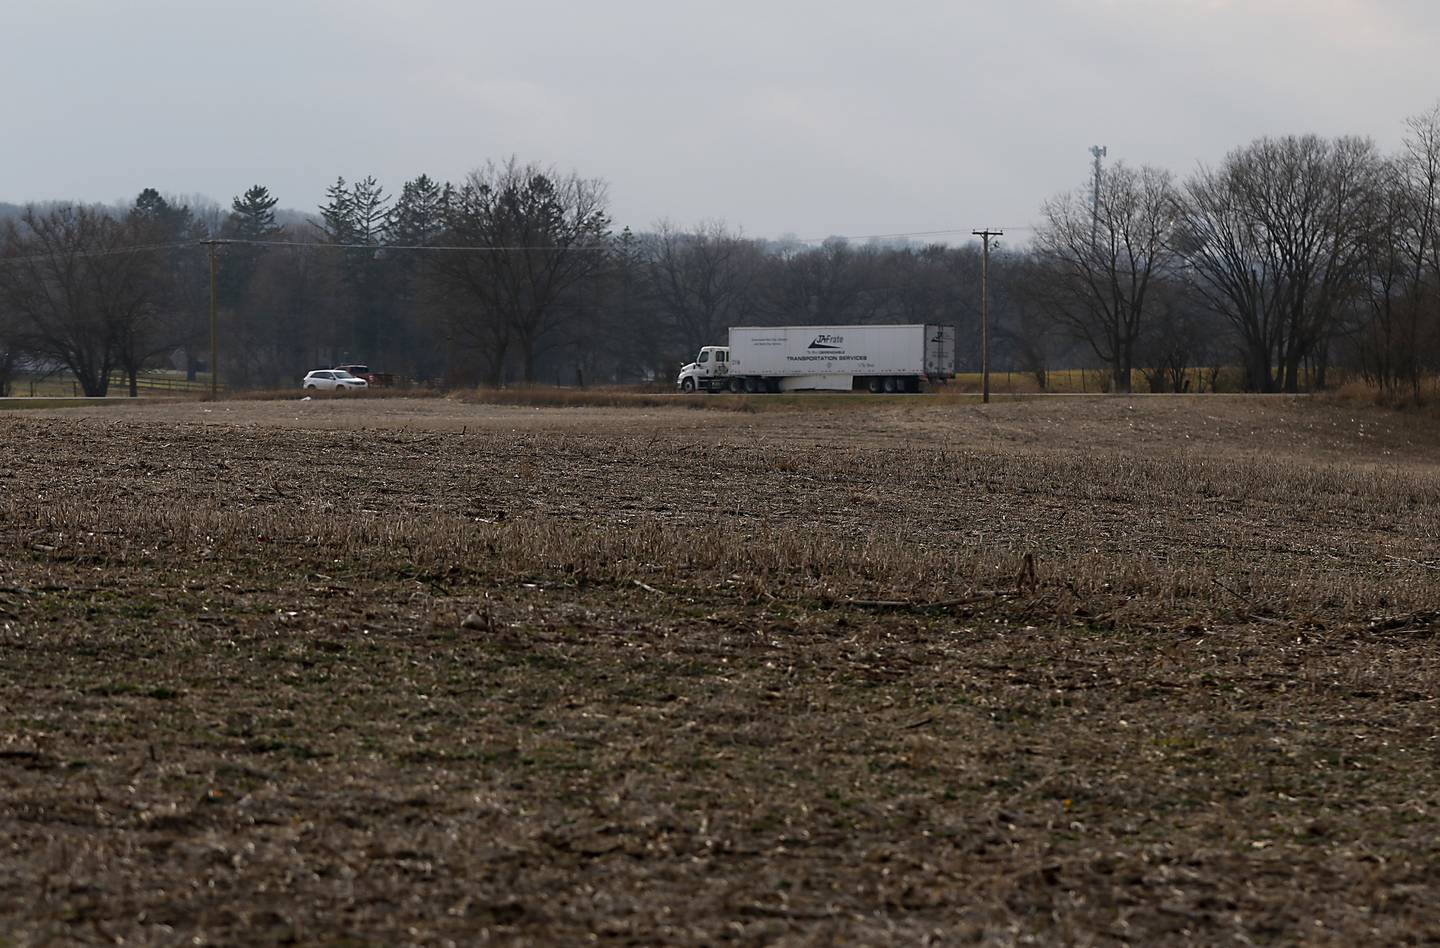 Traffic drives past a farm field on Wilmot Road on Monday, Nov. 28, 2022, in Spring Grove, which was purchased by Super Aggregates to develop into a gravel pit. The Bryants and their neighbors oppose the farm land being converted into a gravel pit.